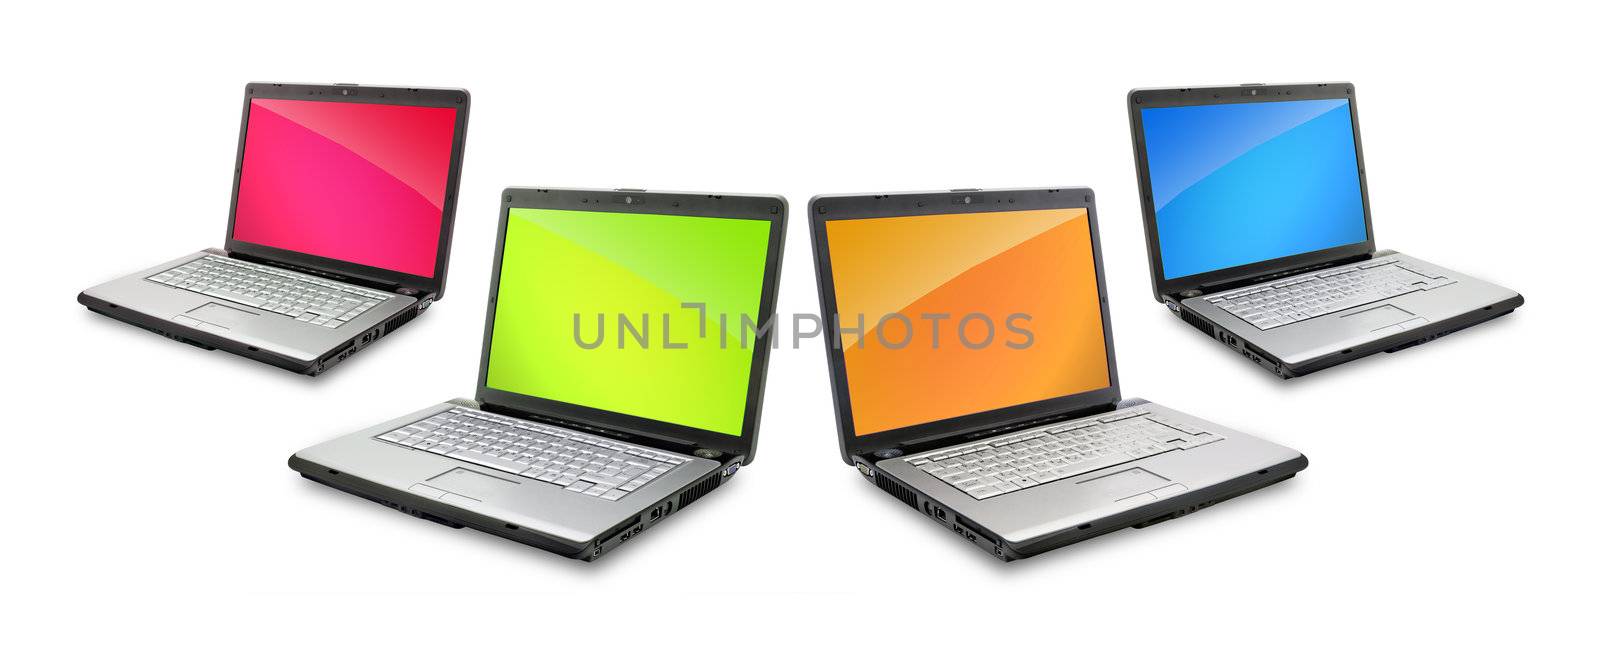 Open laptops showing keyboard and screen isolated on white background